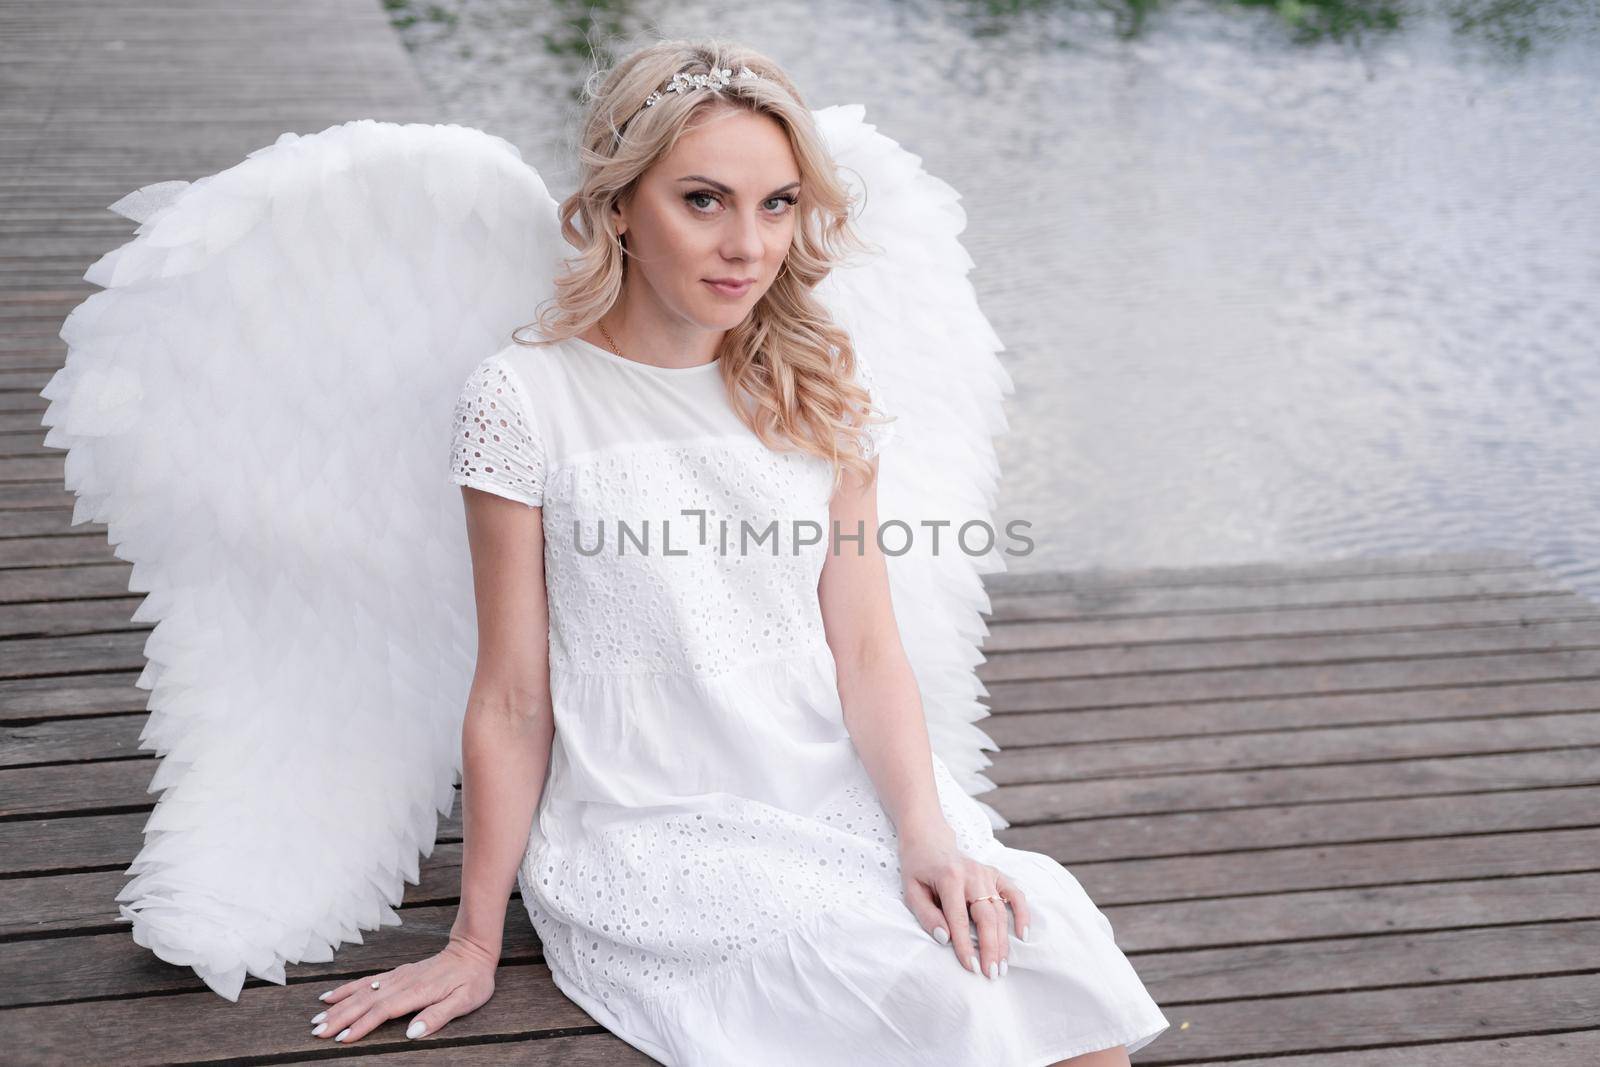 charming blonde with white angel wings standing by the water. beautiful woman in angel costume. goddess.